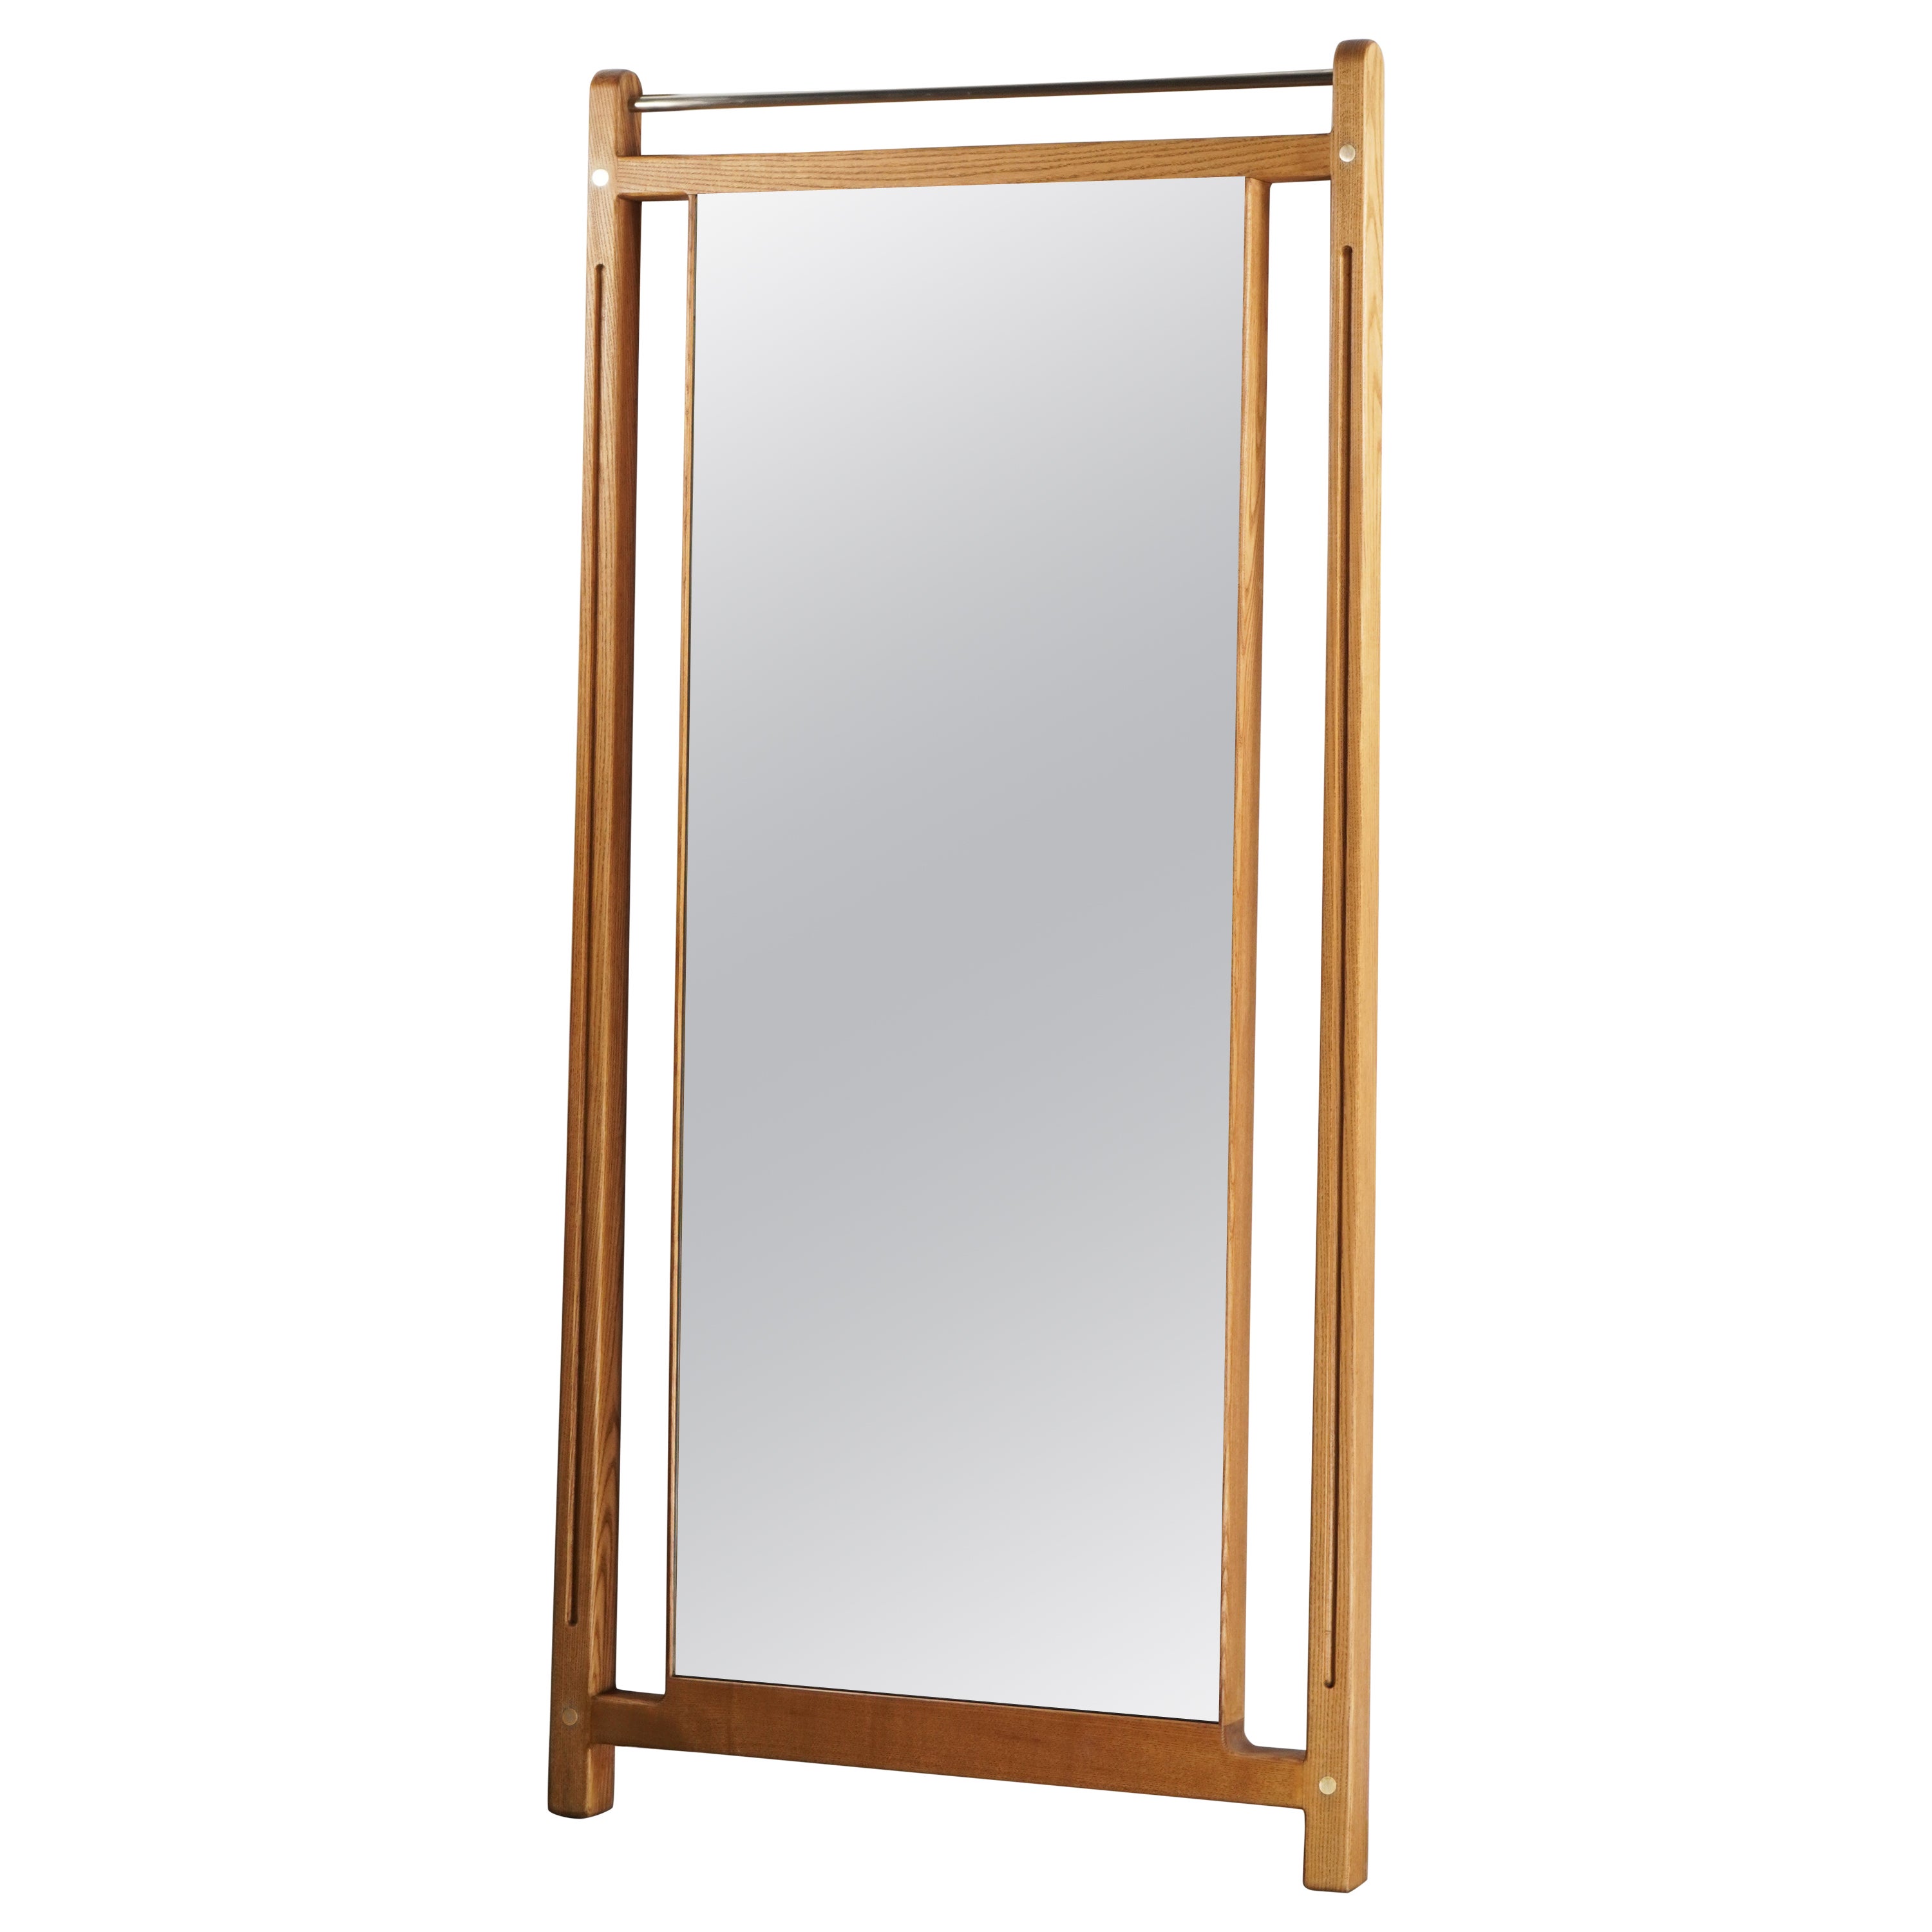 South Asian Floor Mirrors and Full-Length Mirrors